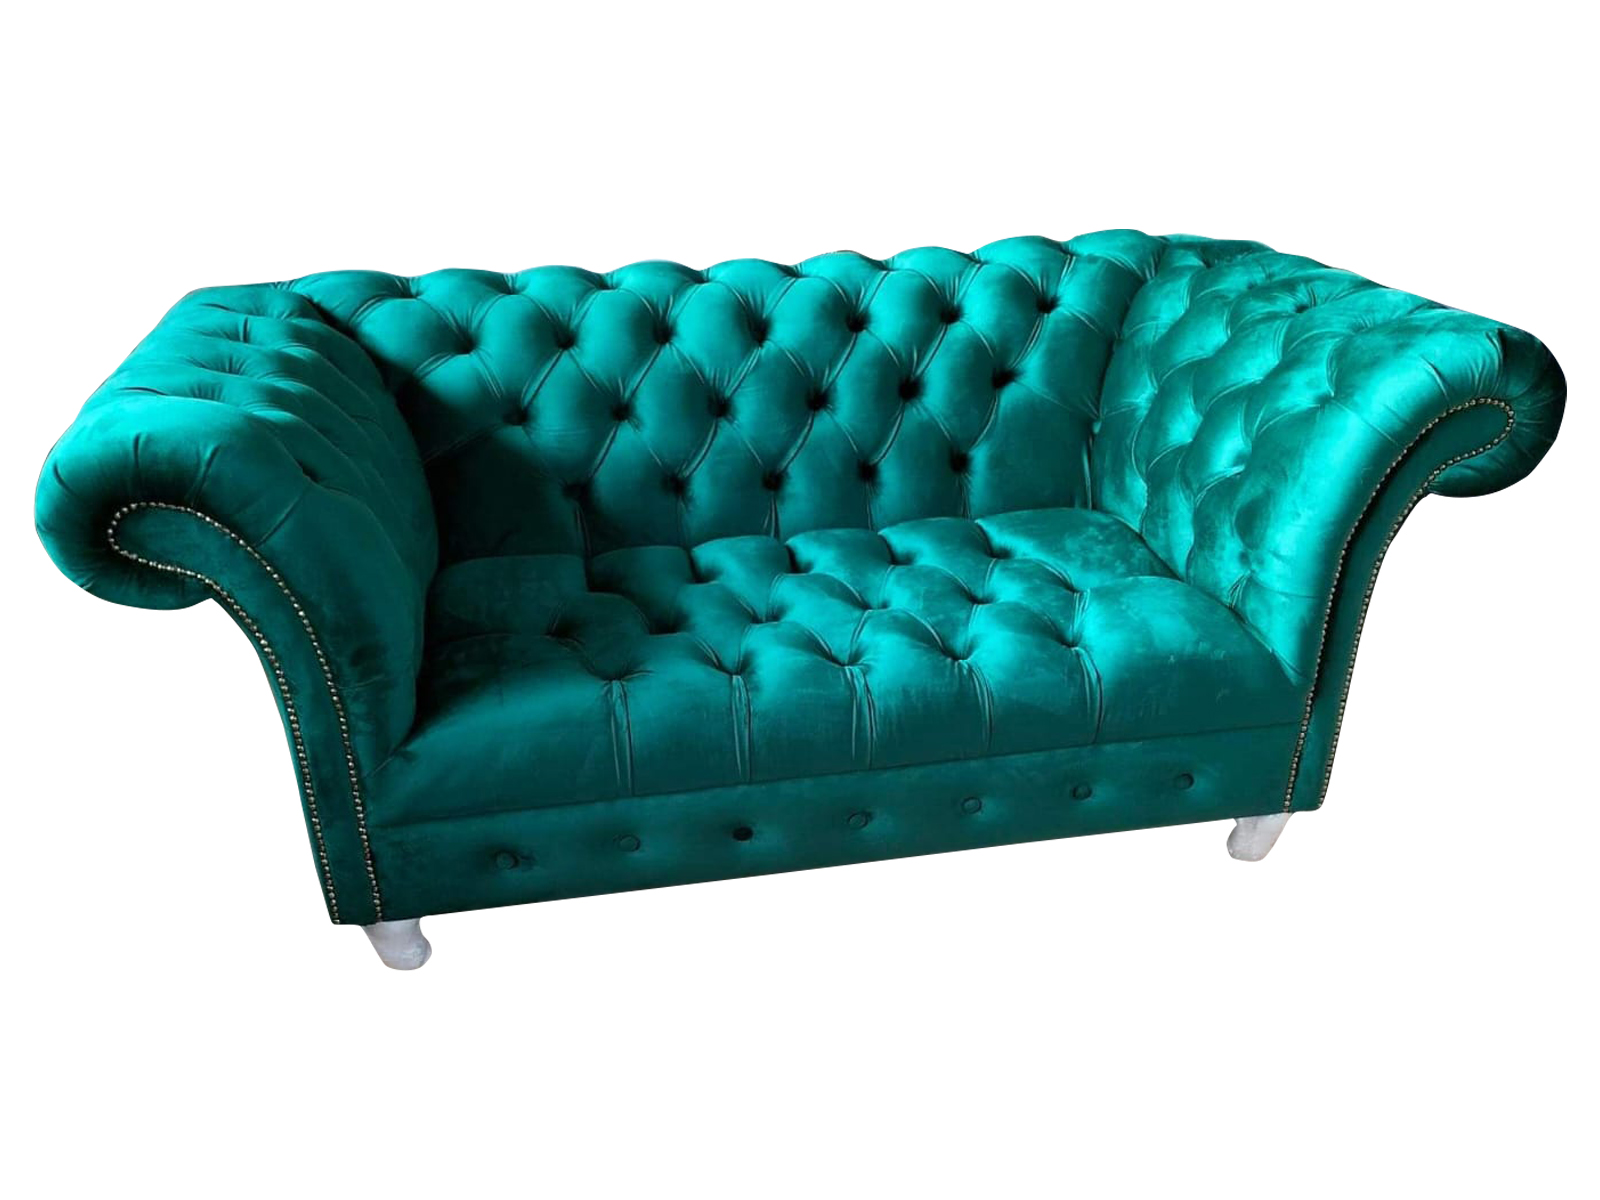 Chesterfield Luxury Sofa 2 Seater Textile Couch Blue Sofas Green Couches